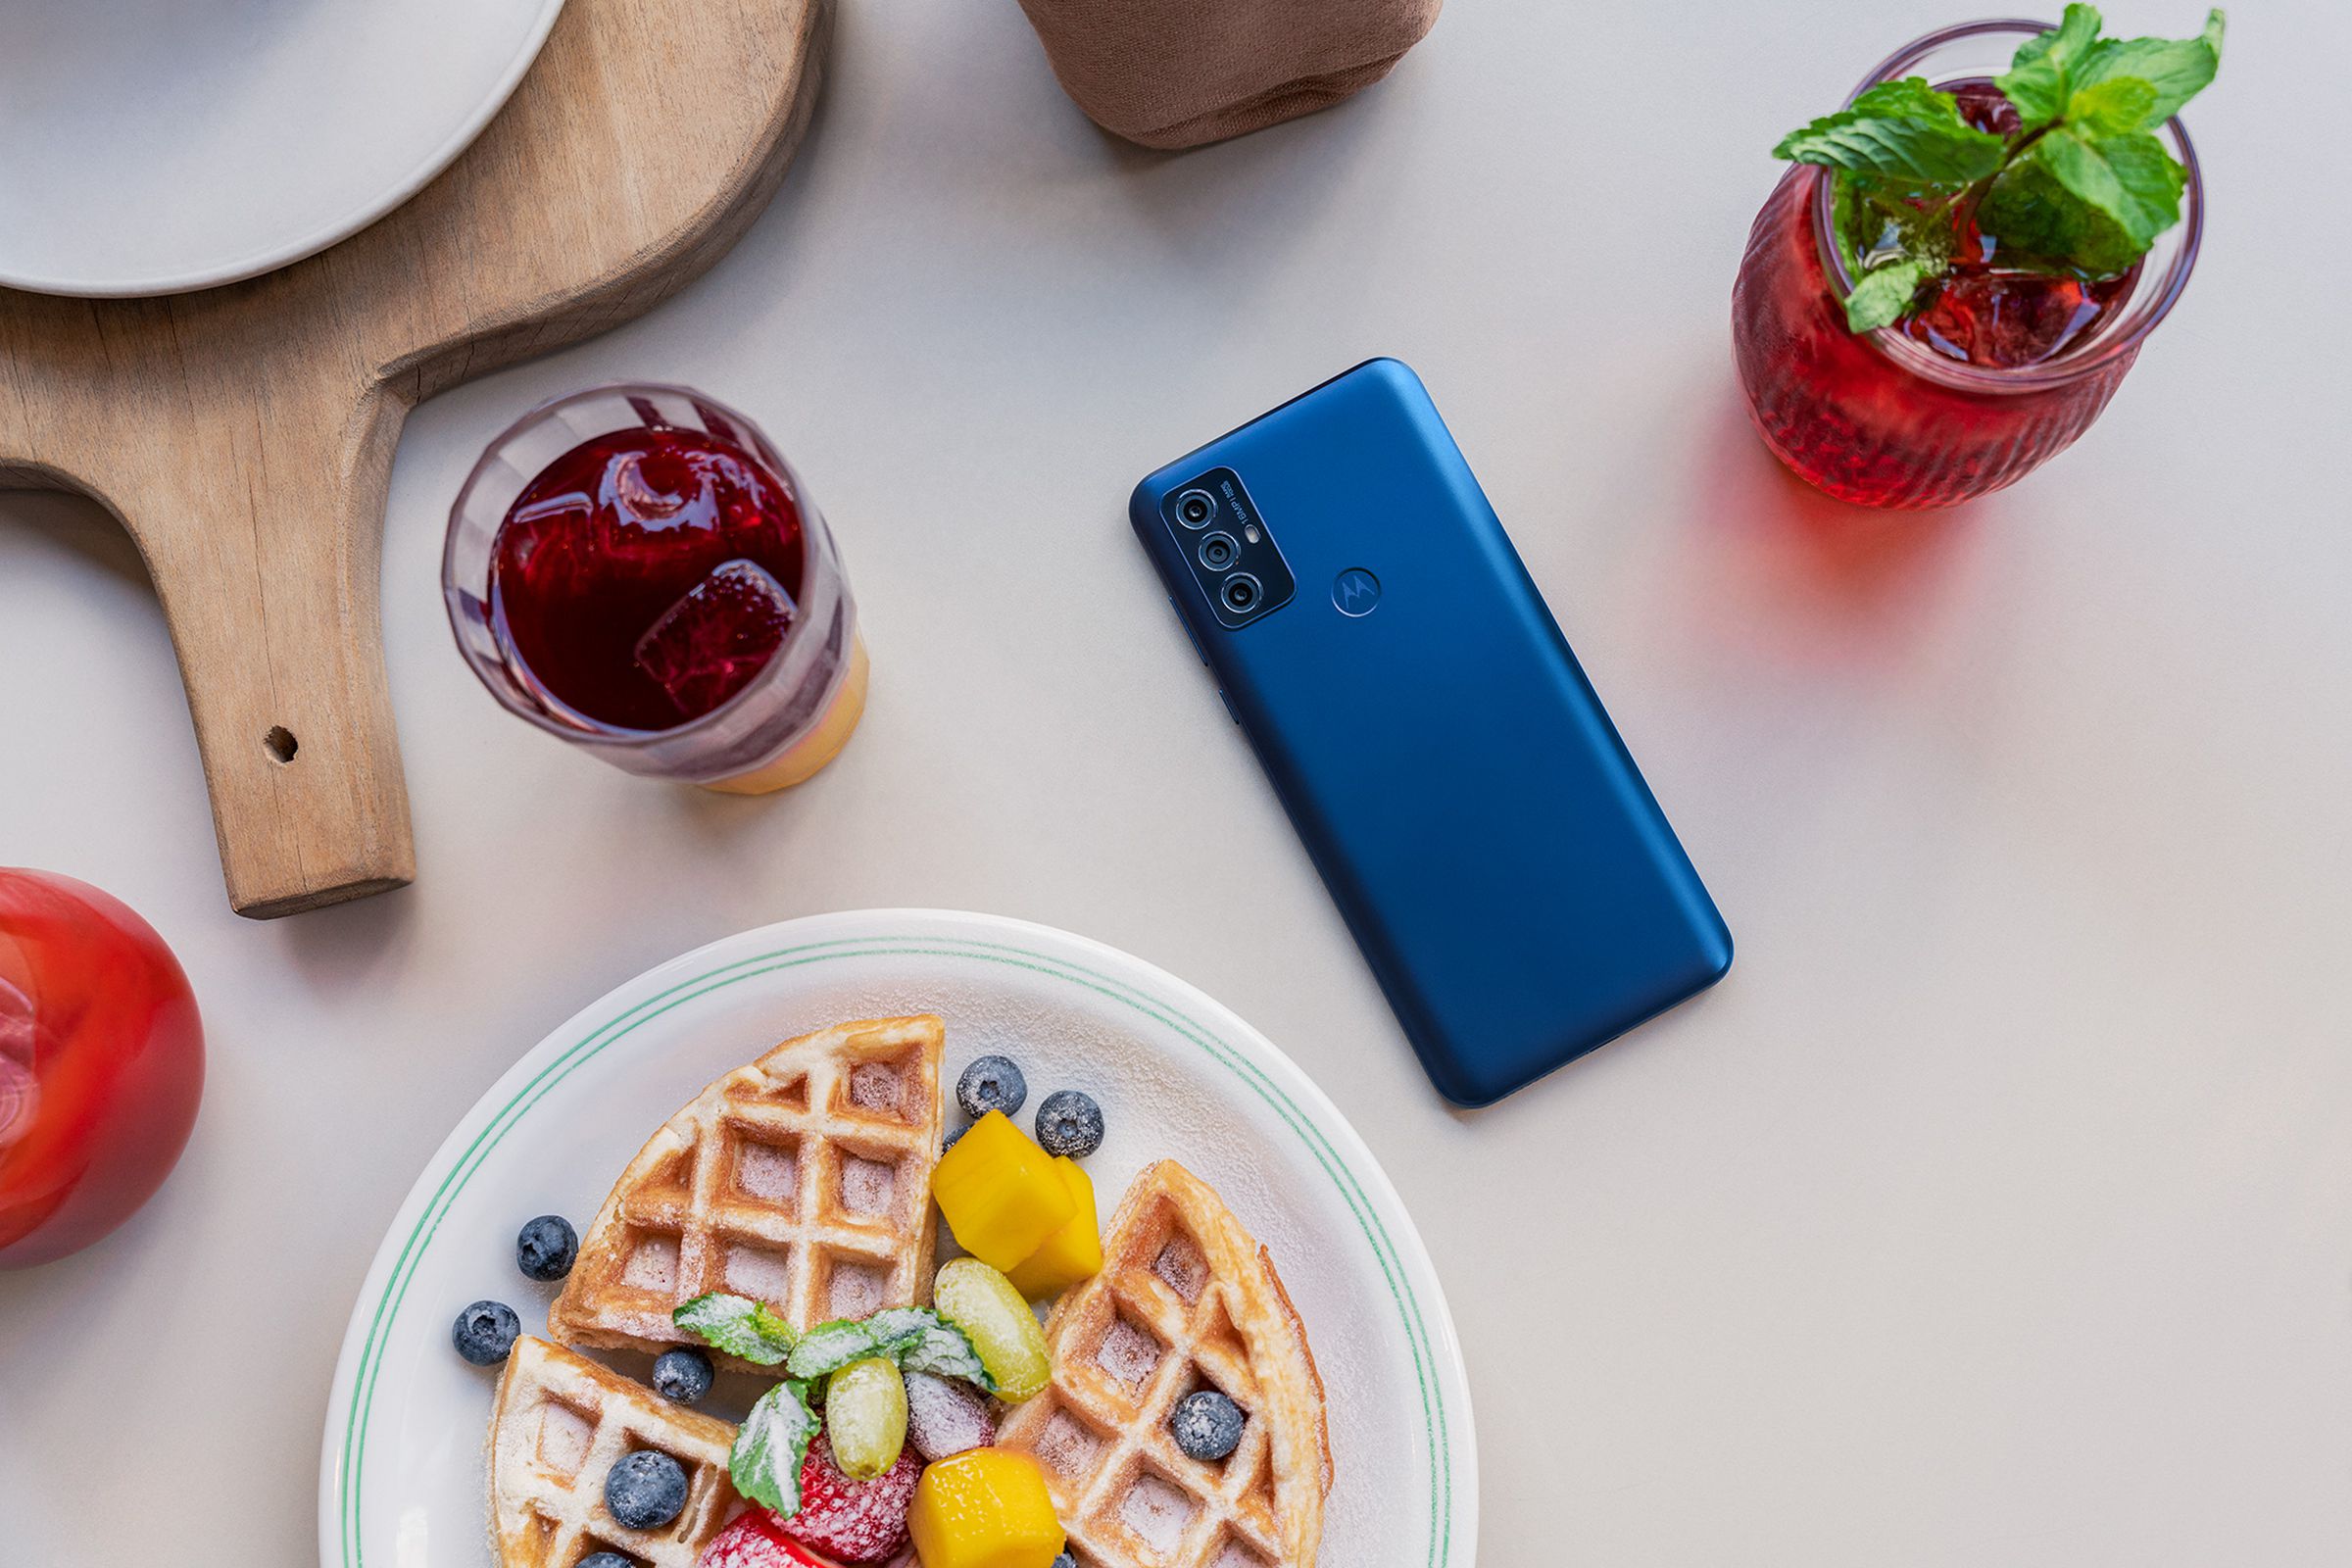 Motorola G Play, in blue, flat on a table with the rear facing up surrounded by breakfast plates and items.